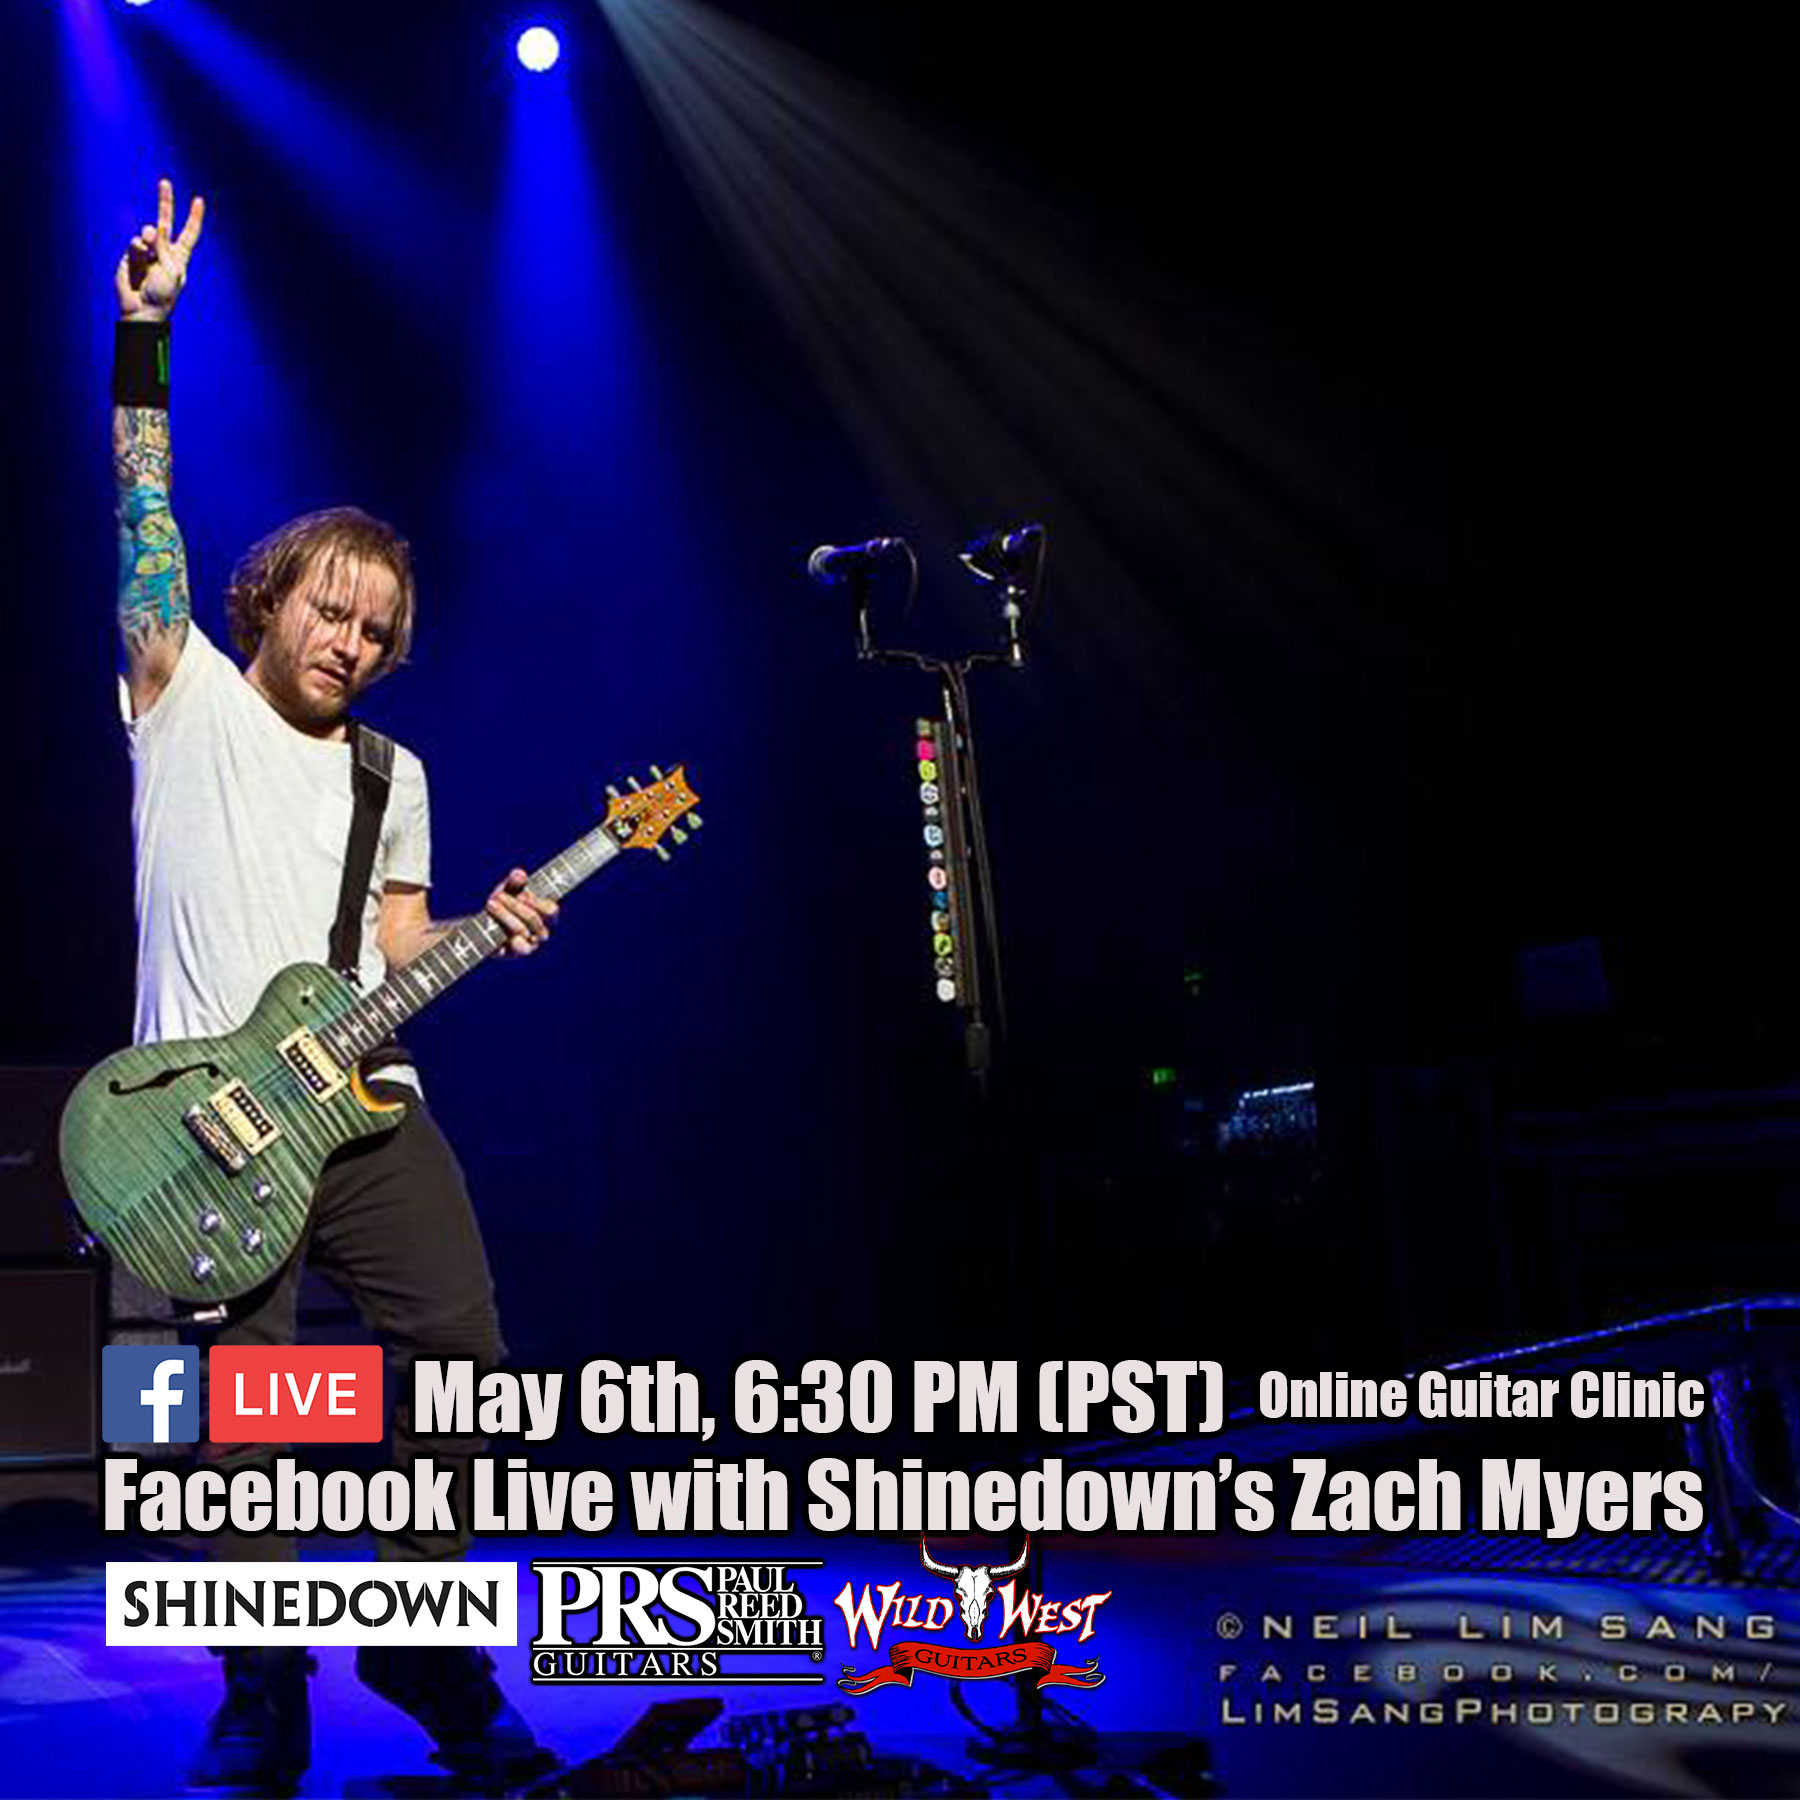 Facebook Live with Zach Myers from Shinedown Guitar Clinic SE Zach Myers